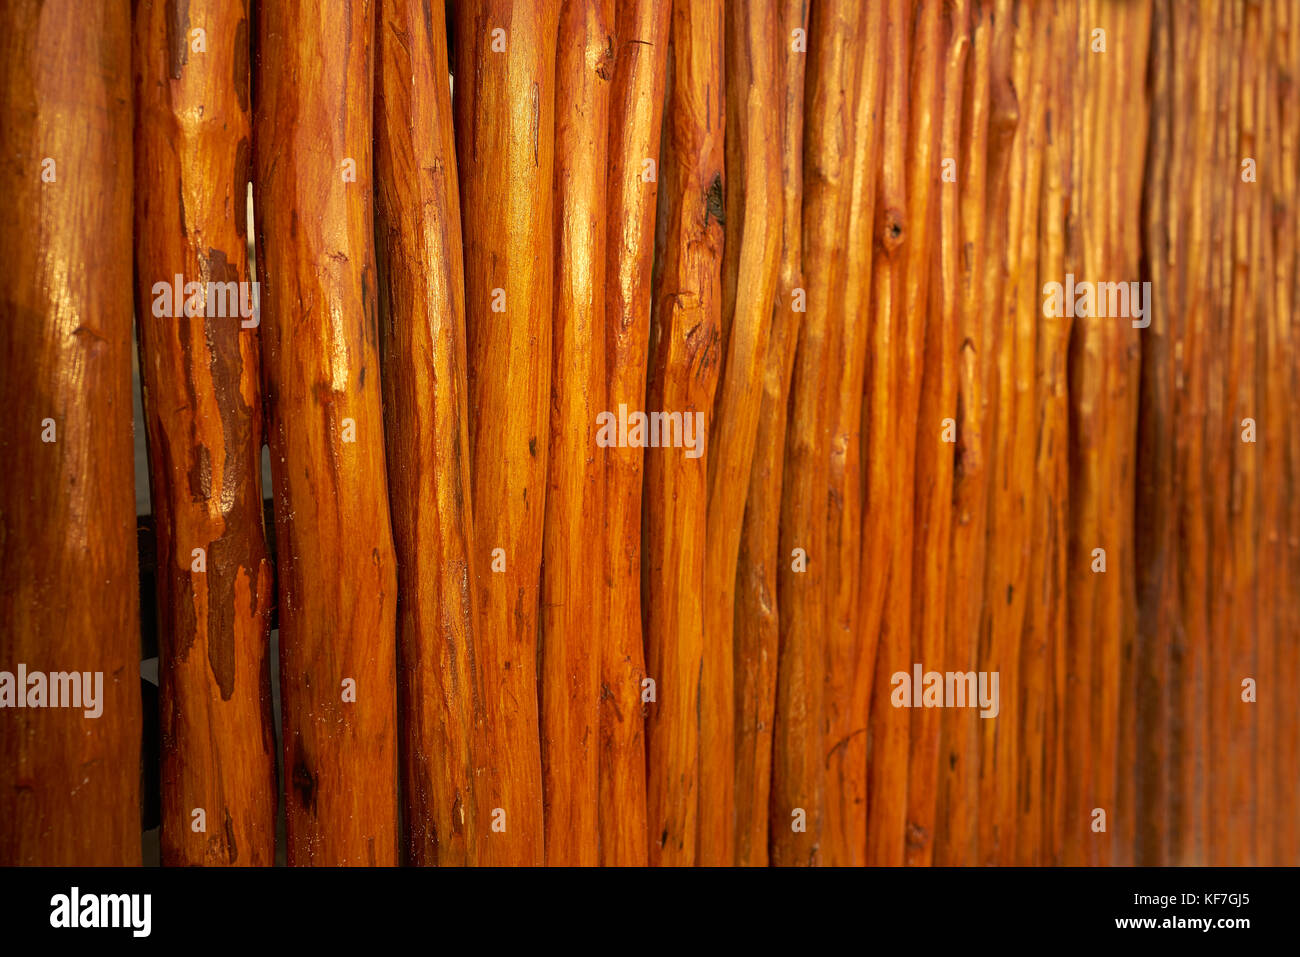 wood sticks in a row texture from Mexico fence wall Stock Photo